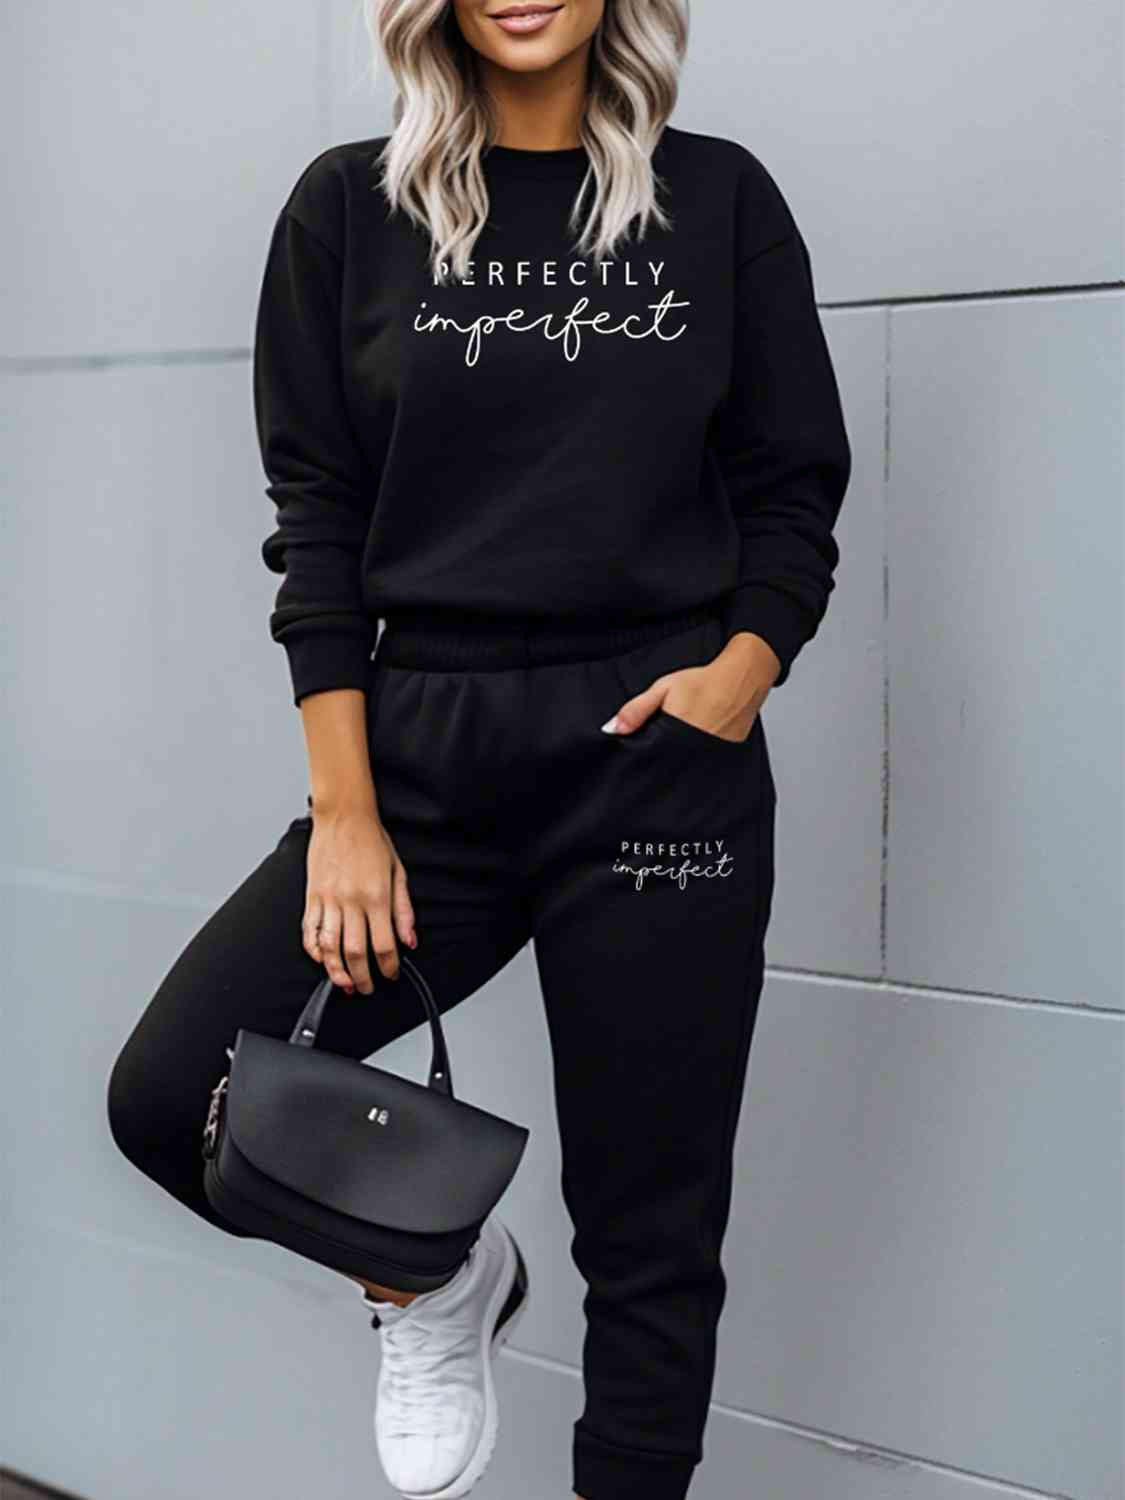 PERFECTLY IMPERFECT Graphic Sweatshirt and Sweatpants